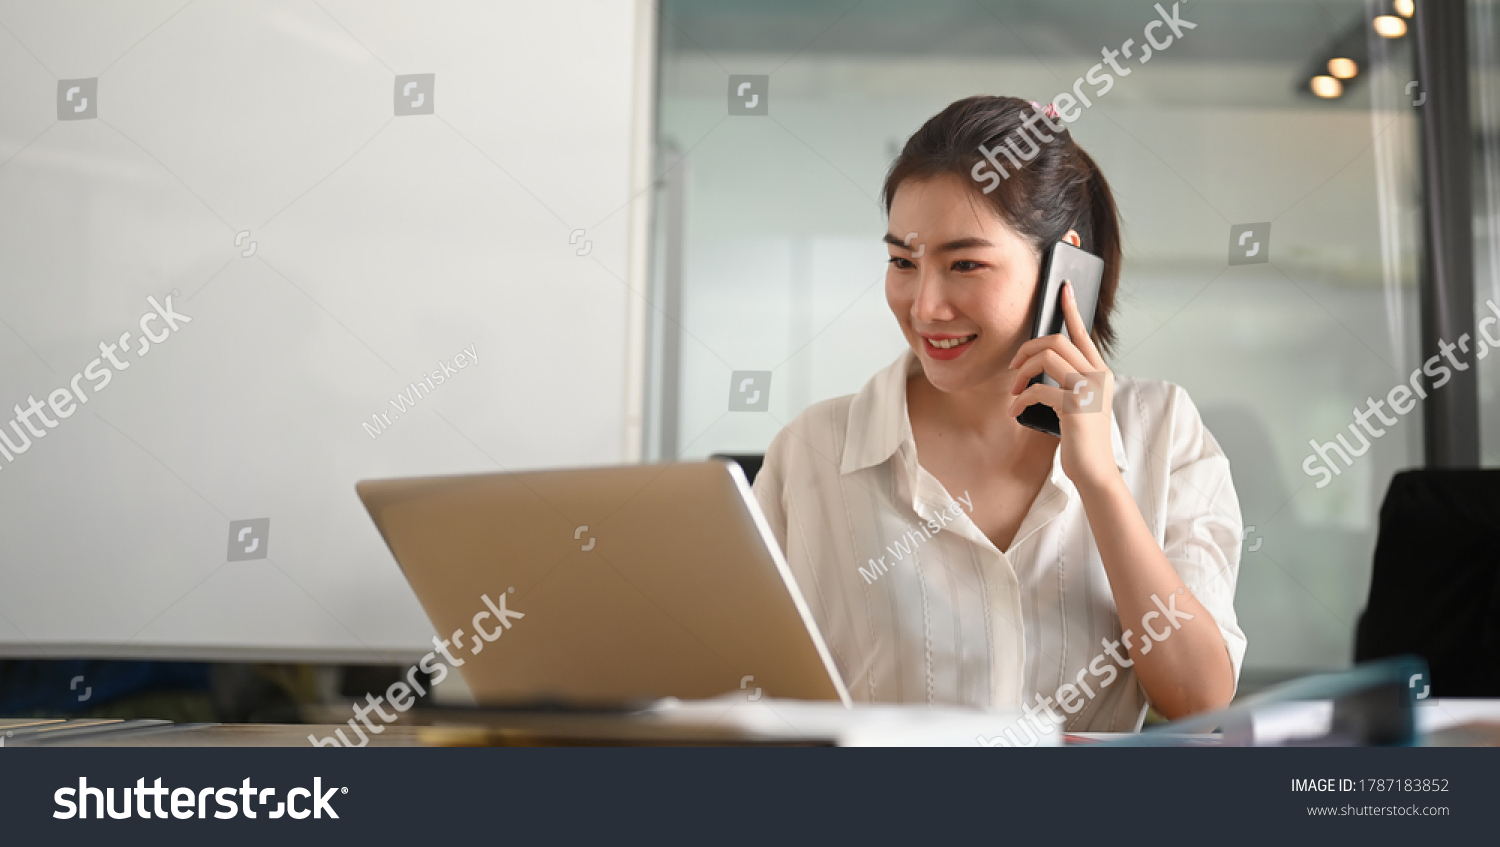 A businesswoman is talking on the mobile phone while sitting and using a computer laptop at the working desk. #1787183852